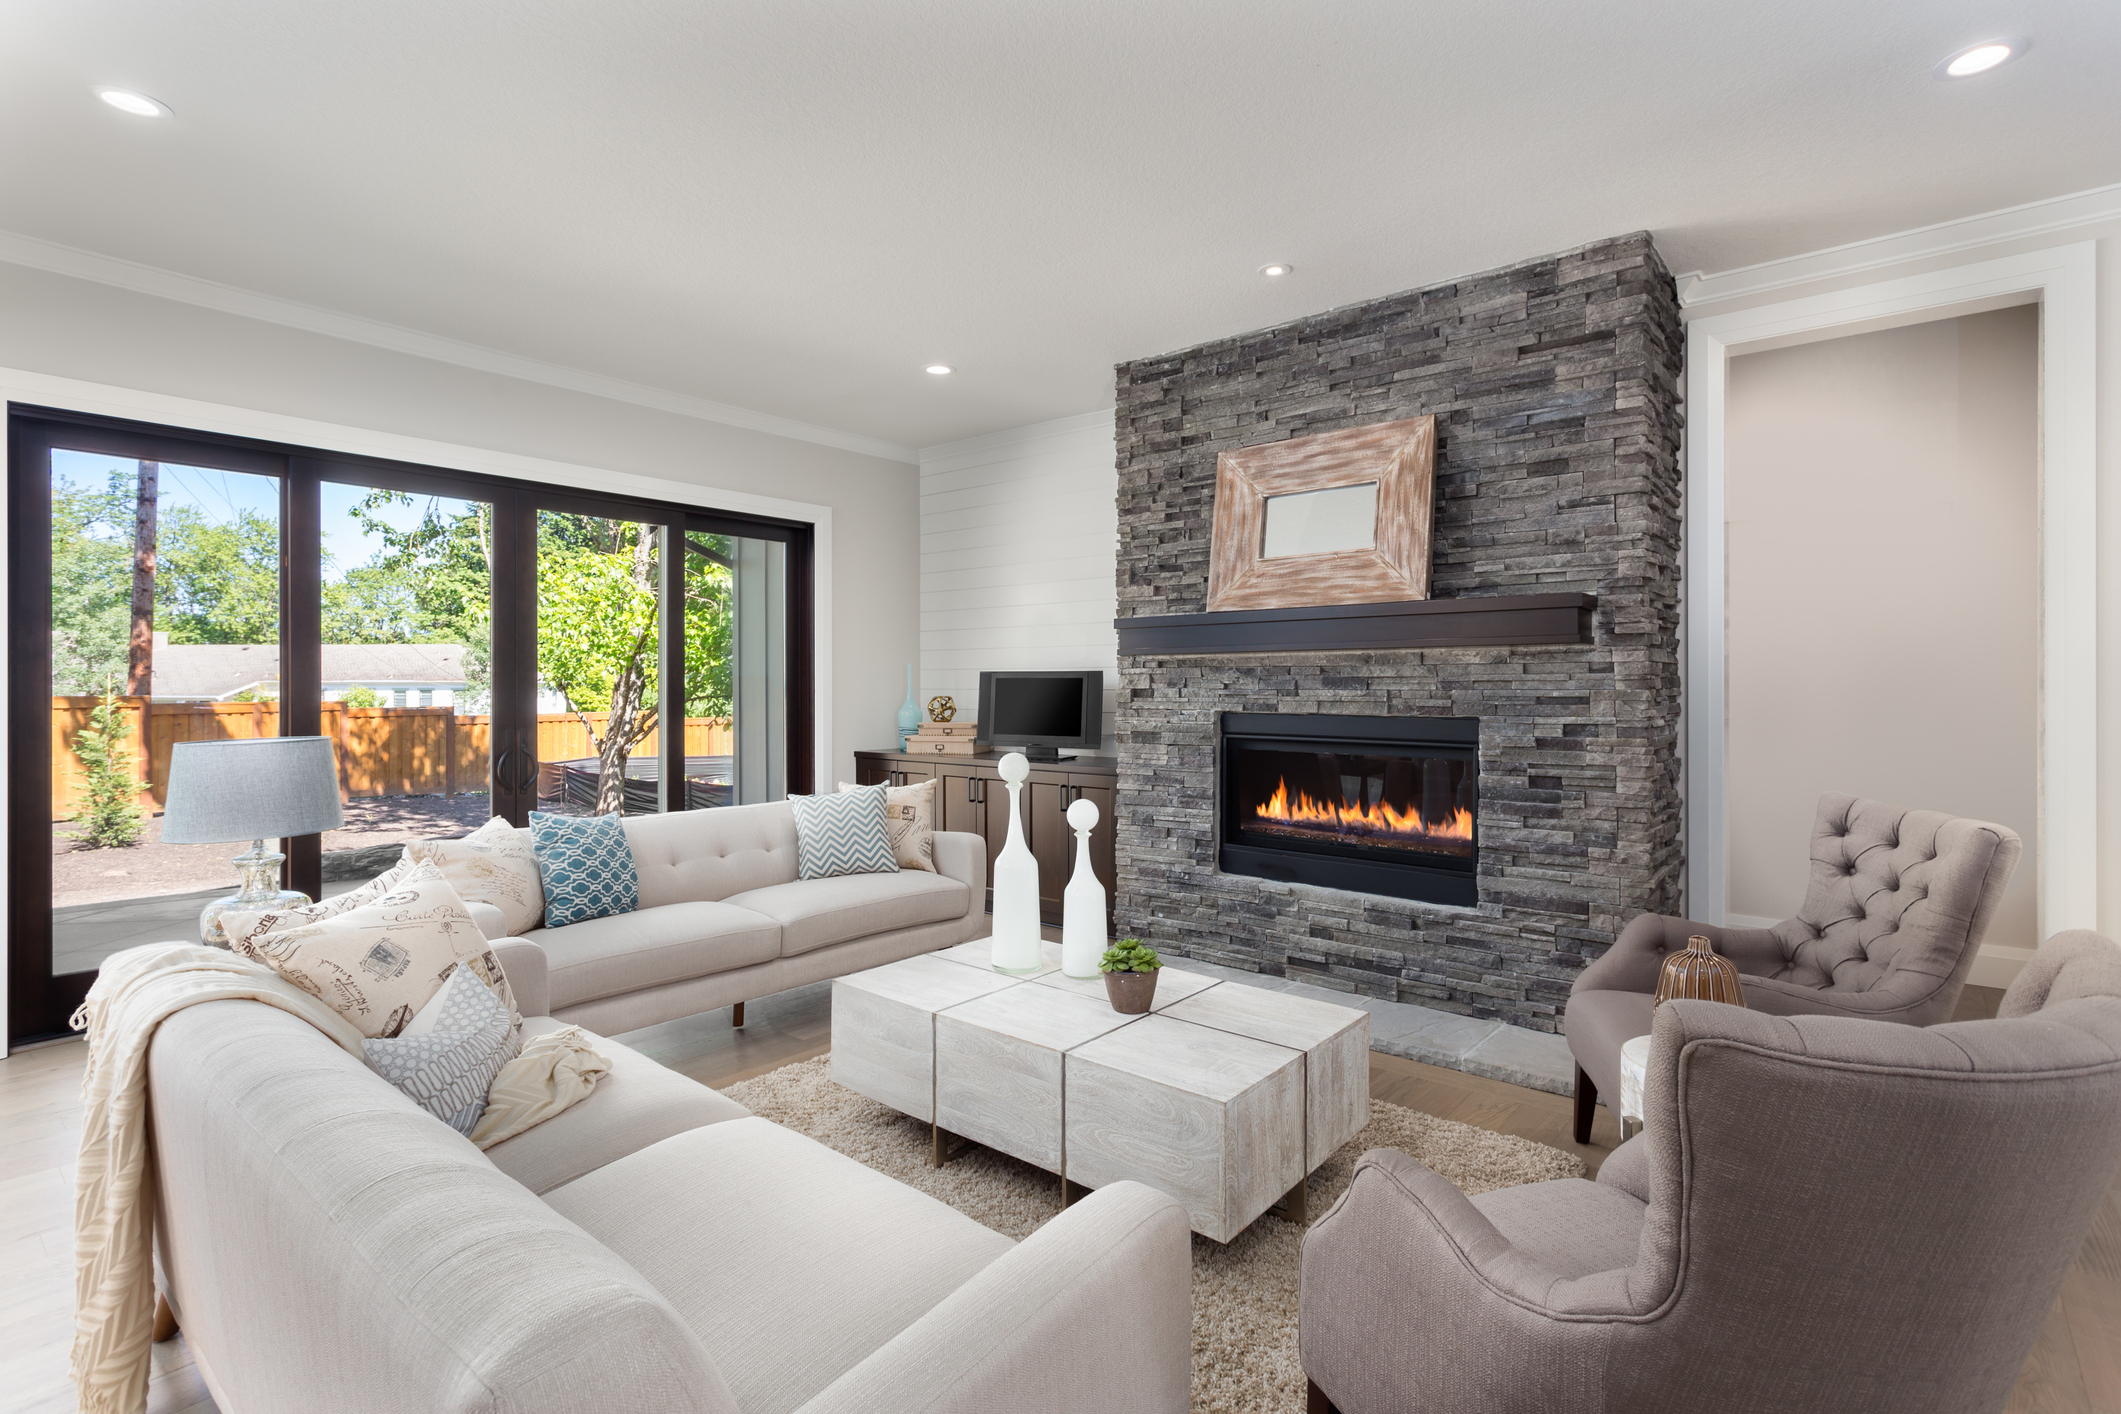 Does A Fireplace Add To Your Home S, How Hard Is It To Add A Fireplace An Existing Home